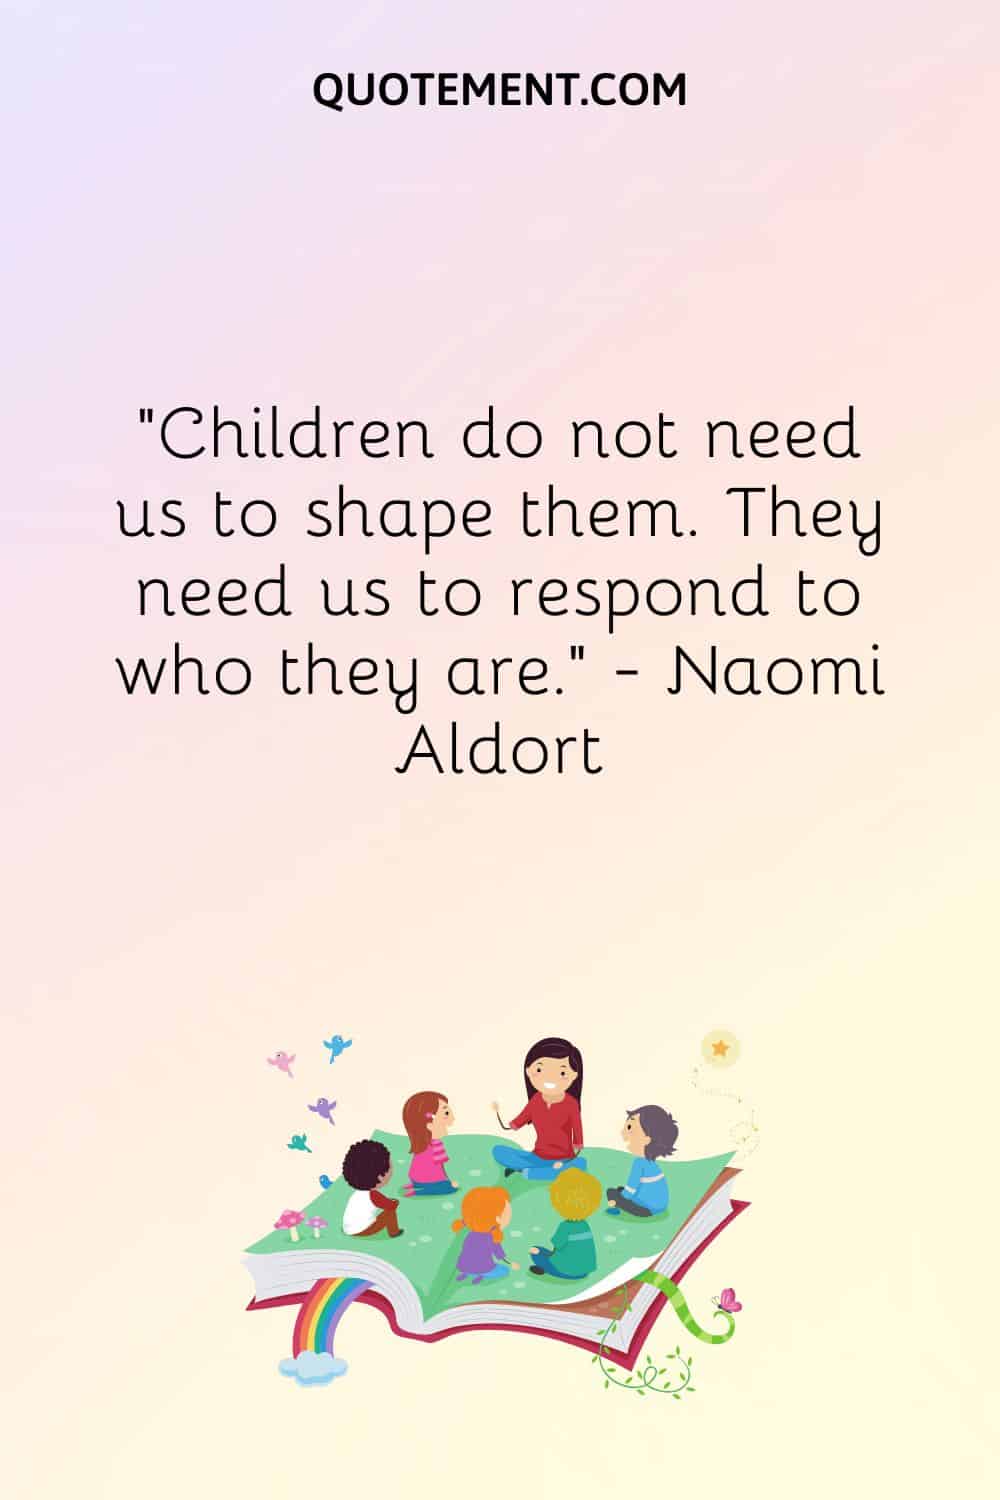 Children do not need us to shape them.